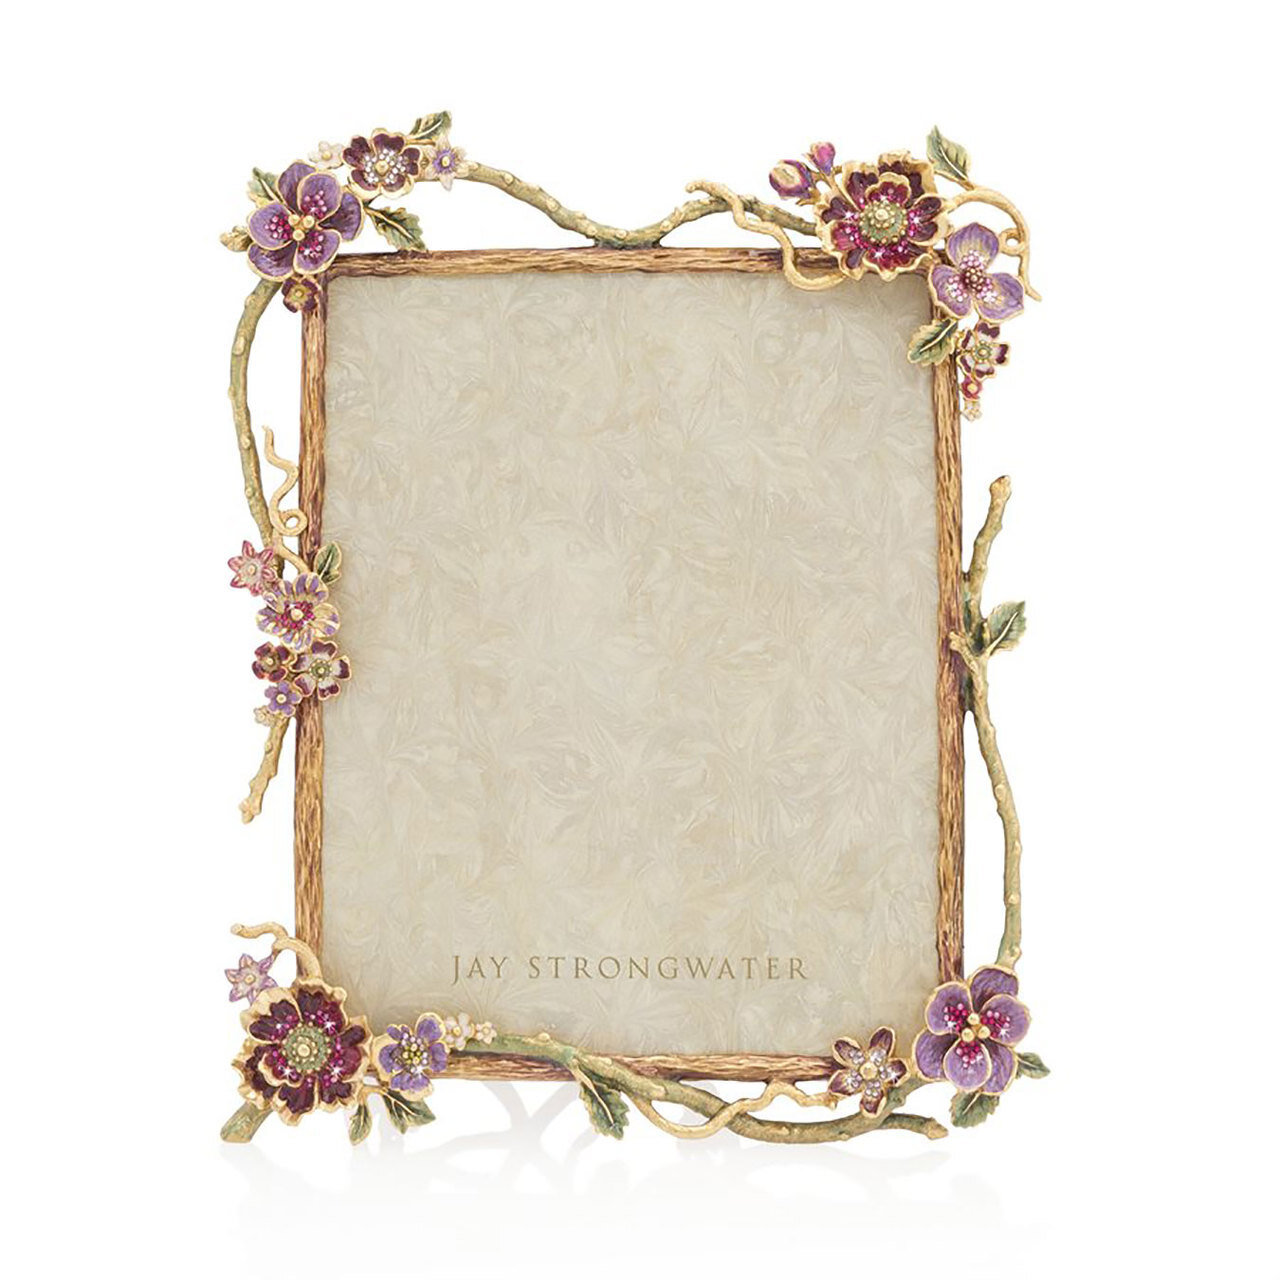 Jay Strongwater Delilah Floral Branch 8 x 10 Inch Frame SPF5860-289